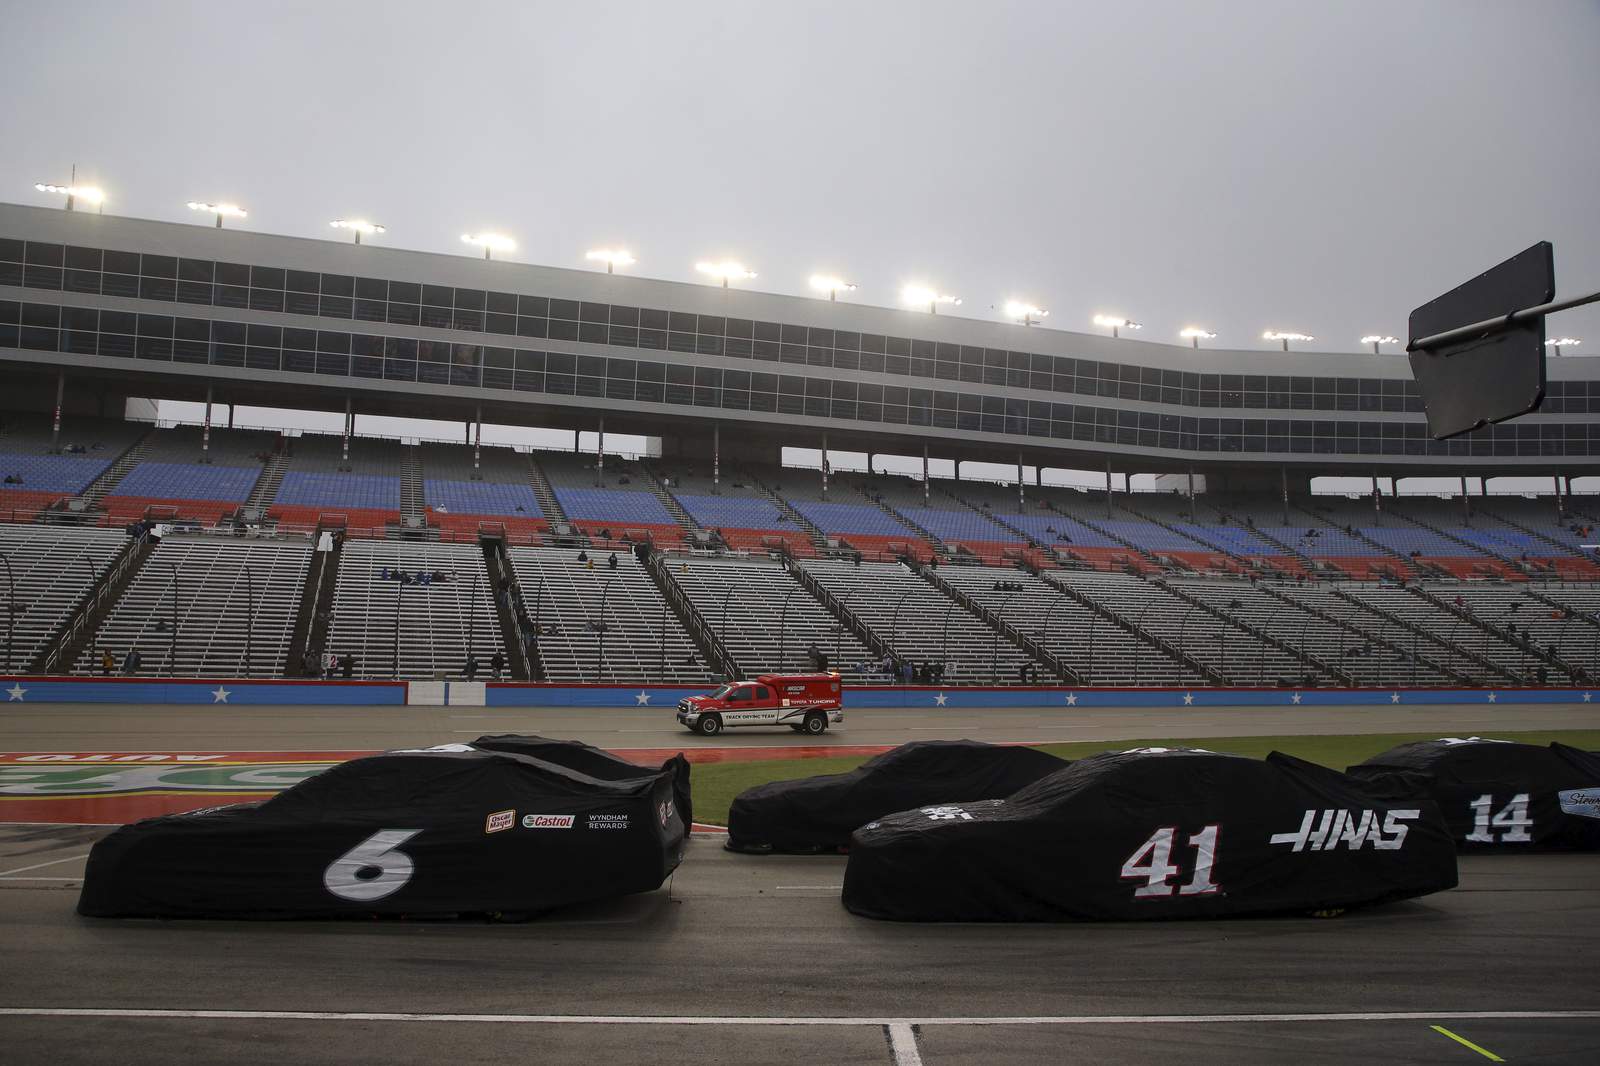 Misty, drizzling day postpones Cup race in Texas on Lap 52